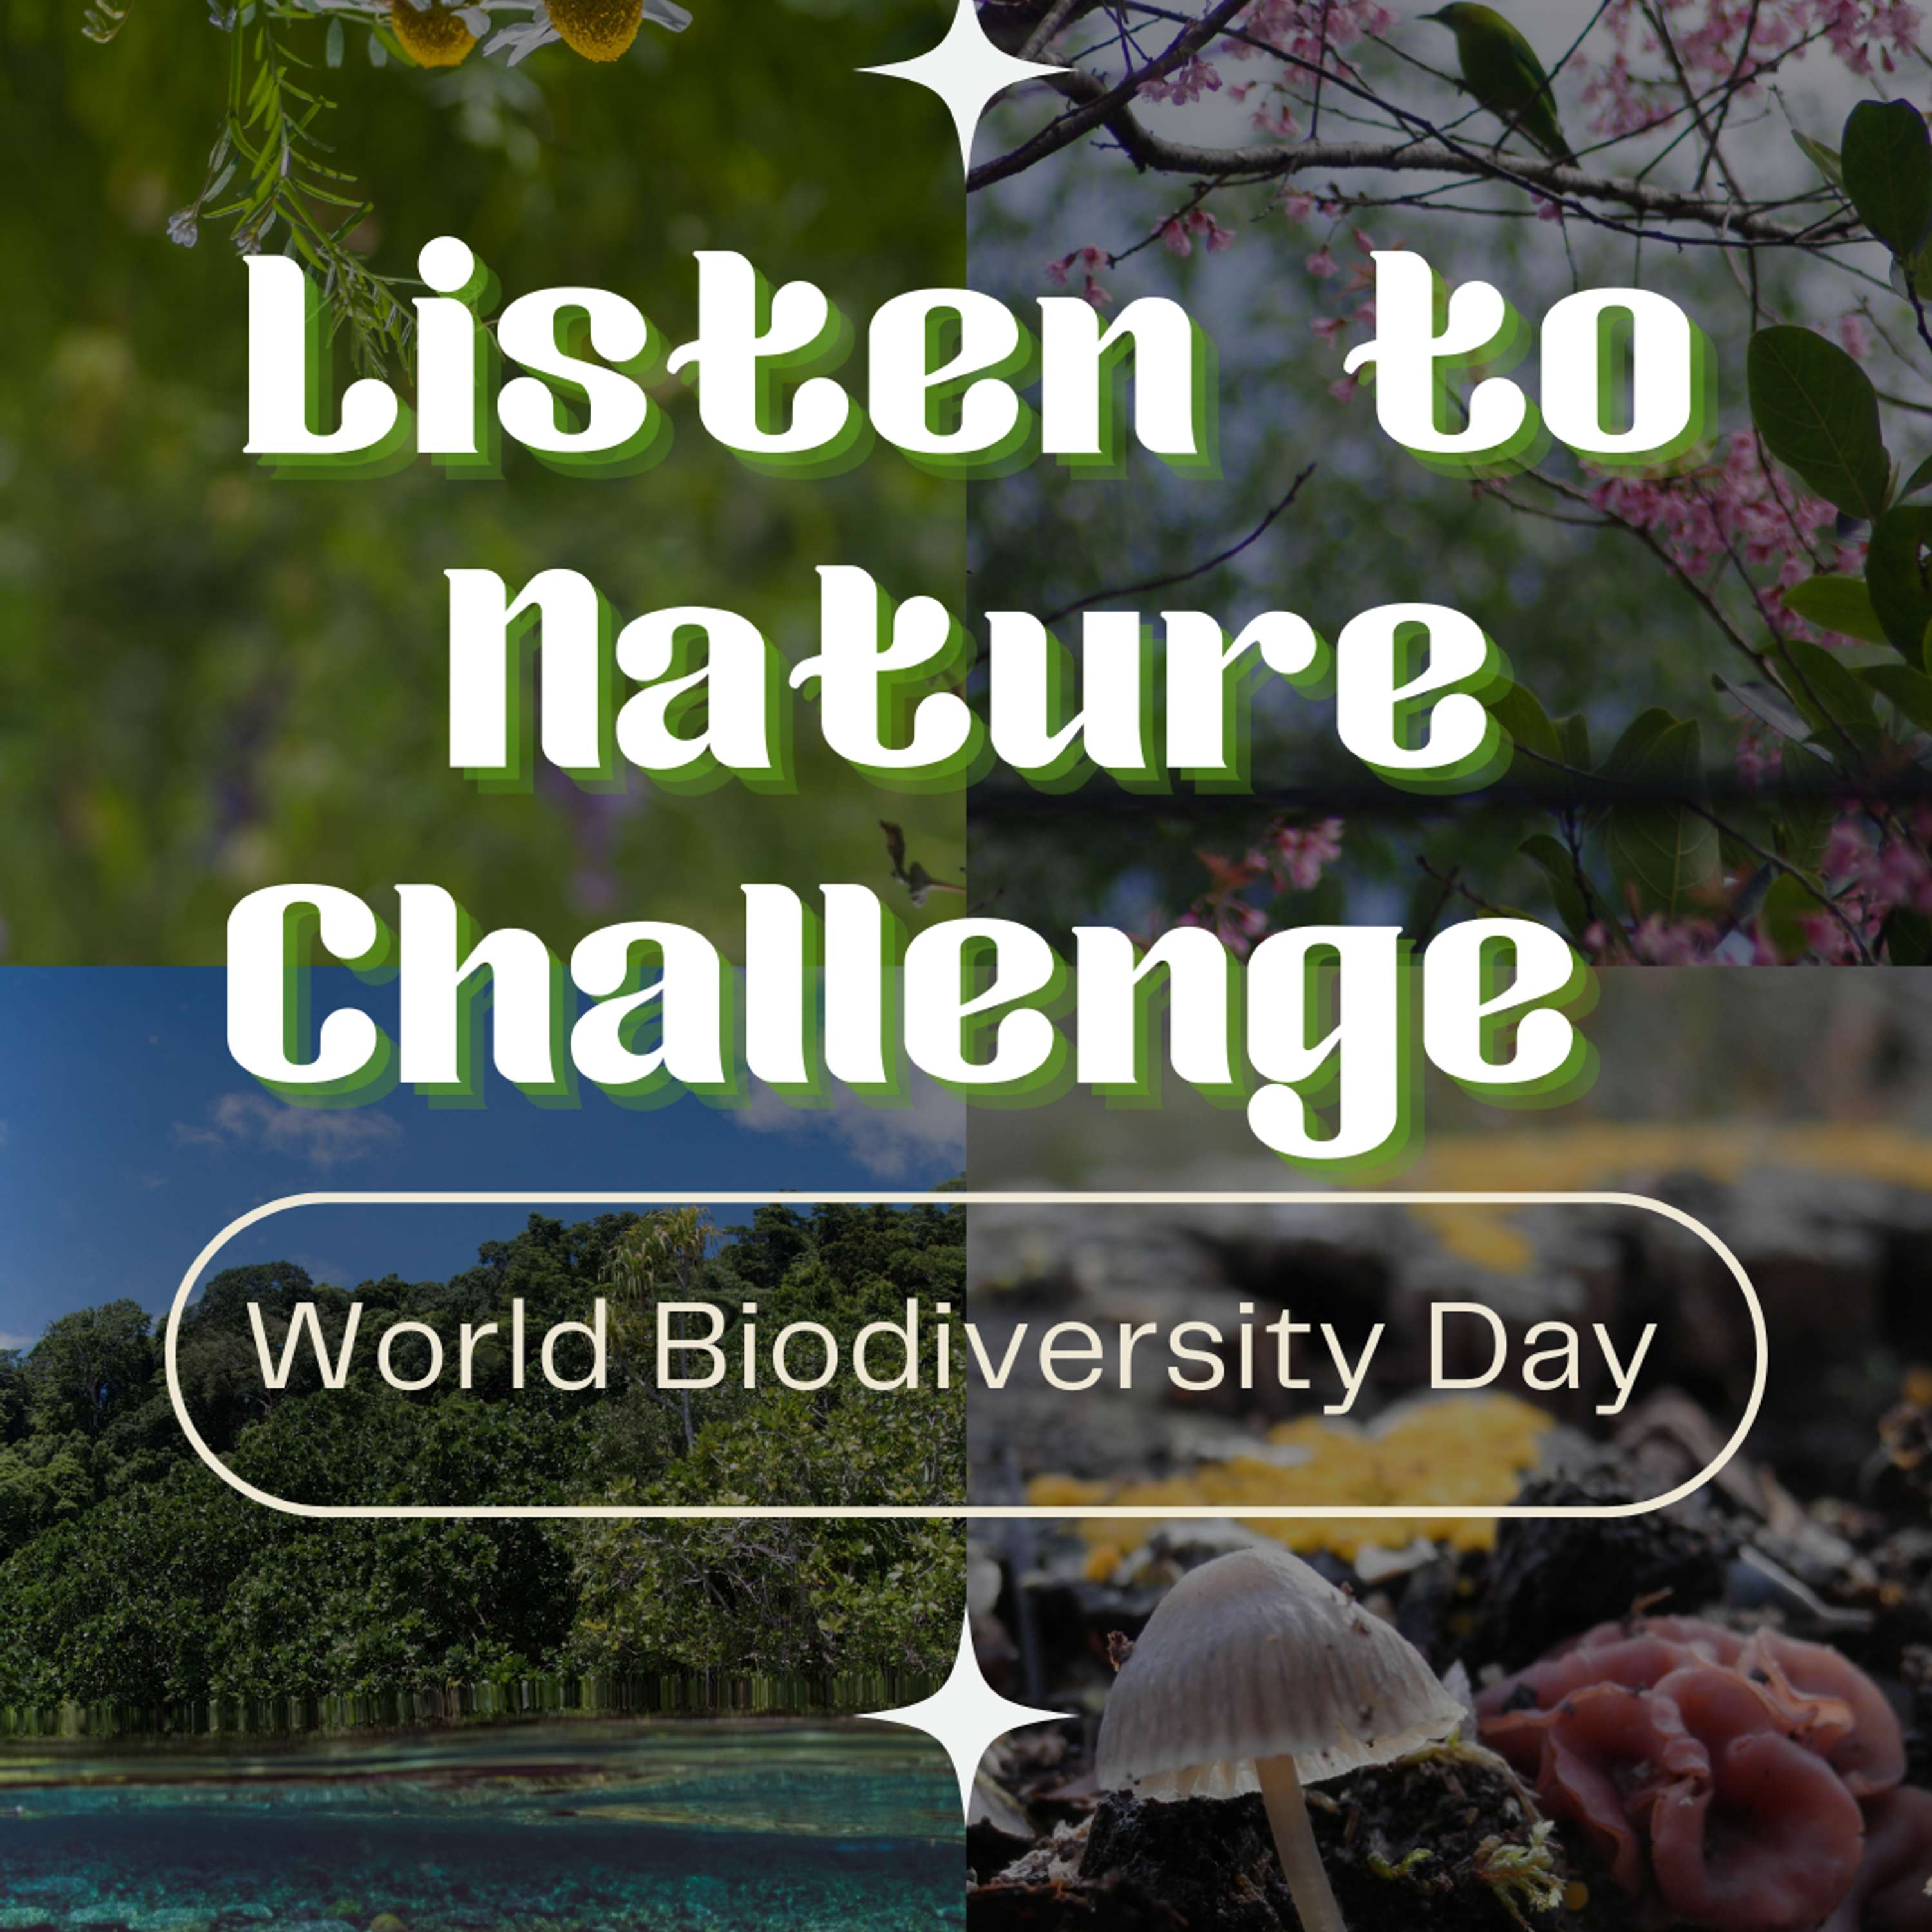 It’s World Biodiversity Day! Join us to celebrate with the #ListenToNature Challenge